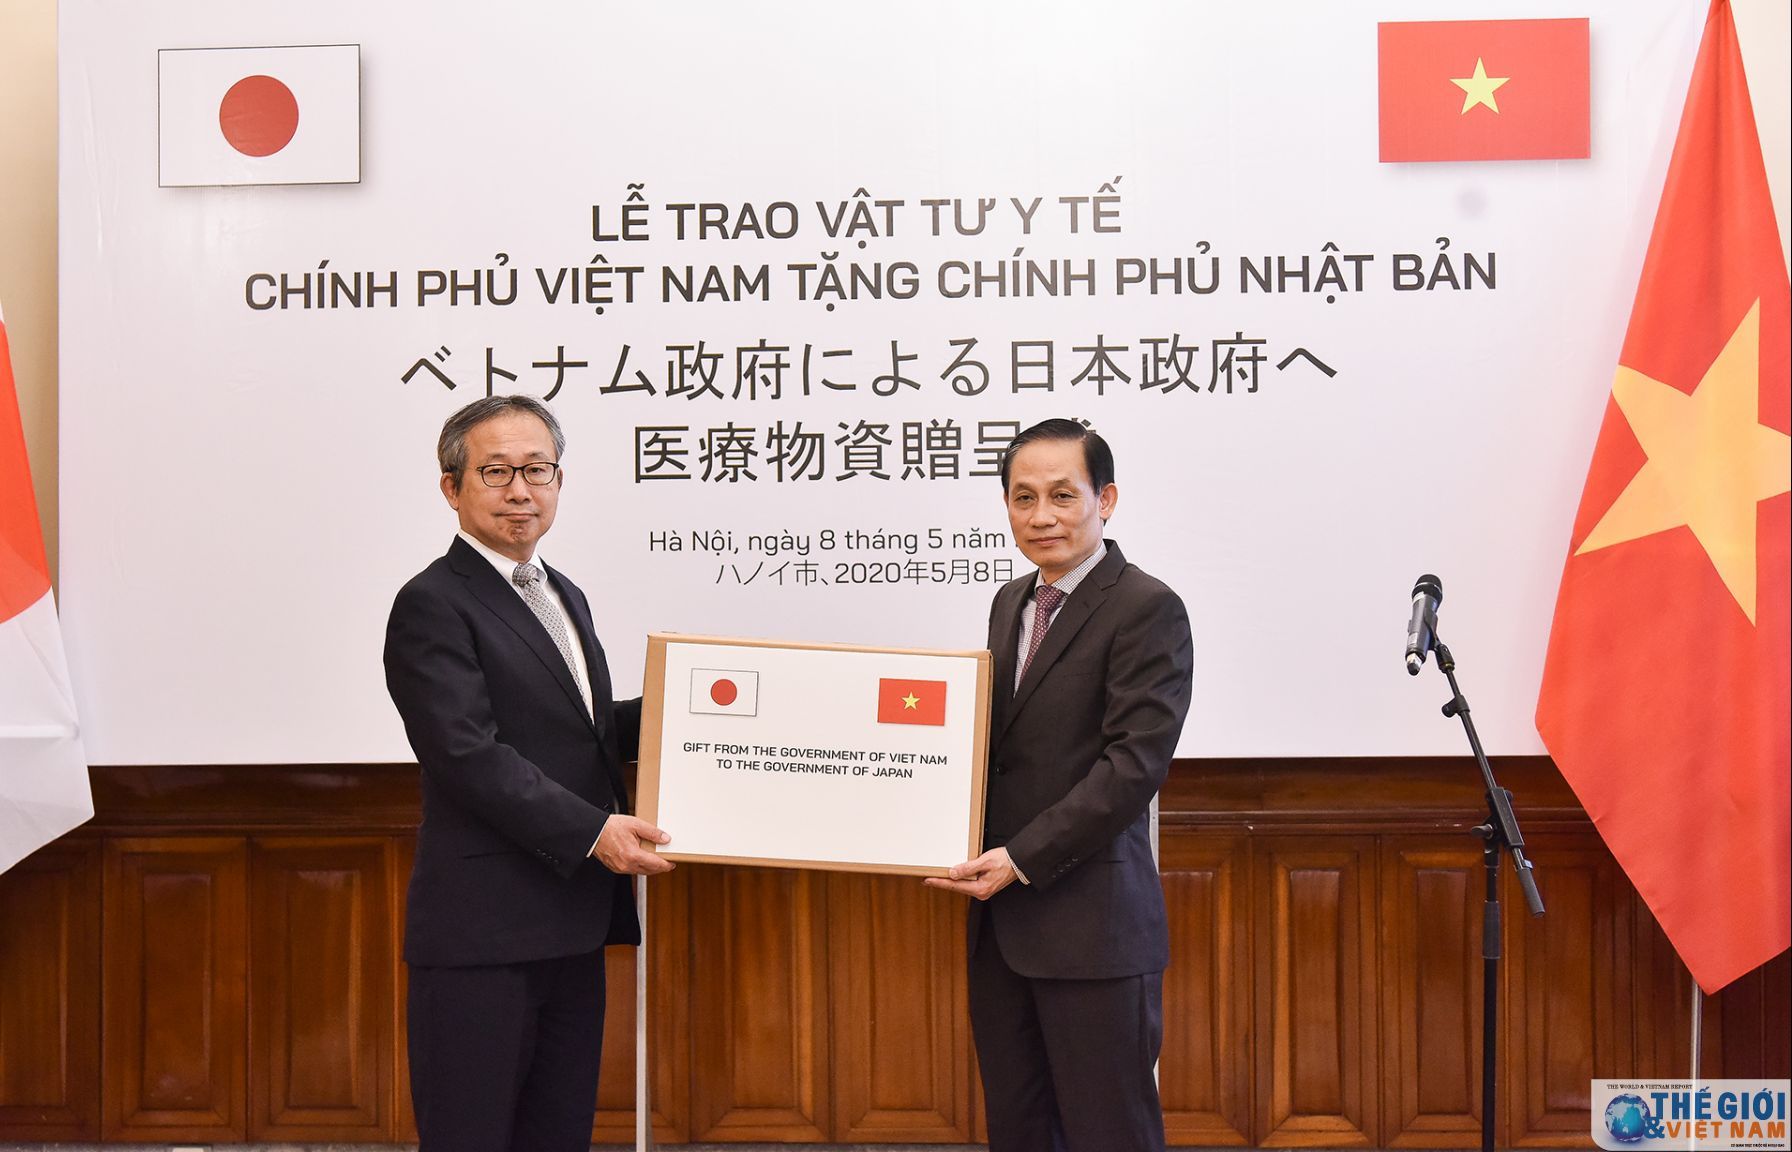 Vietnam presents 140,000 medical face masks to Japan to help fight COVID-19